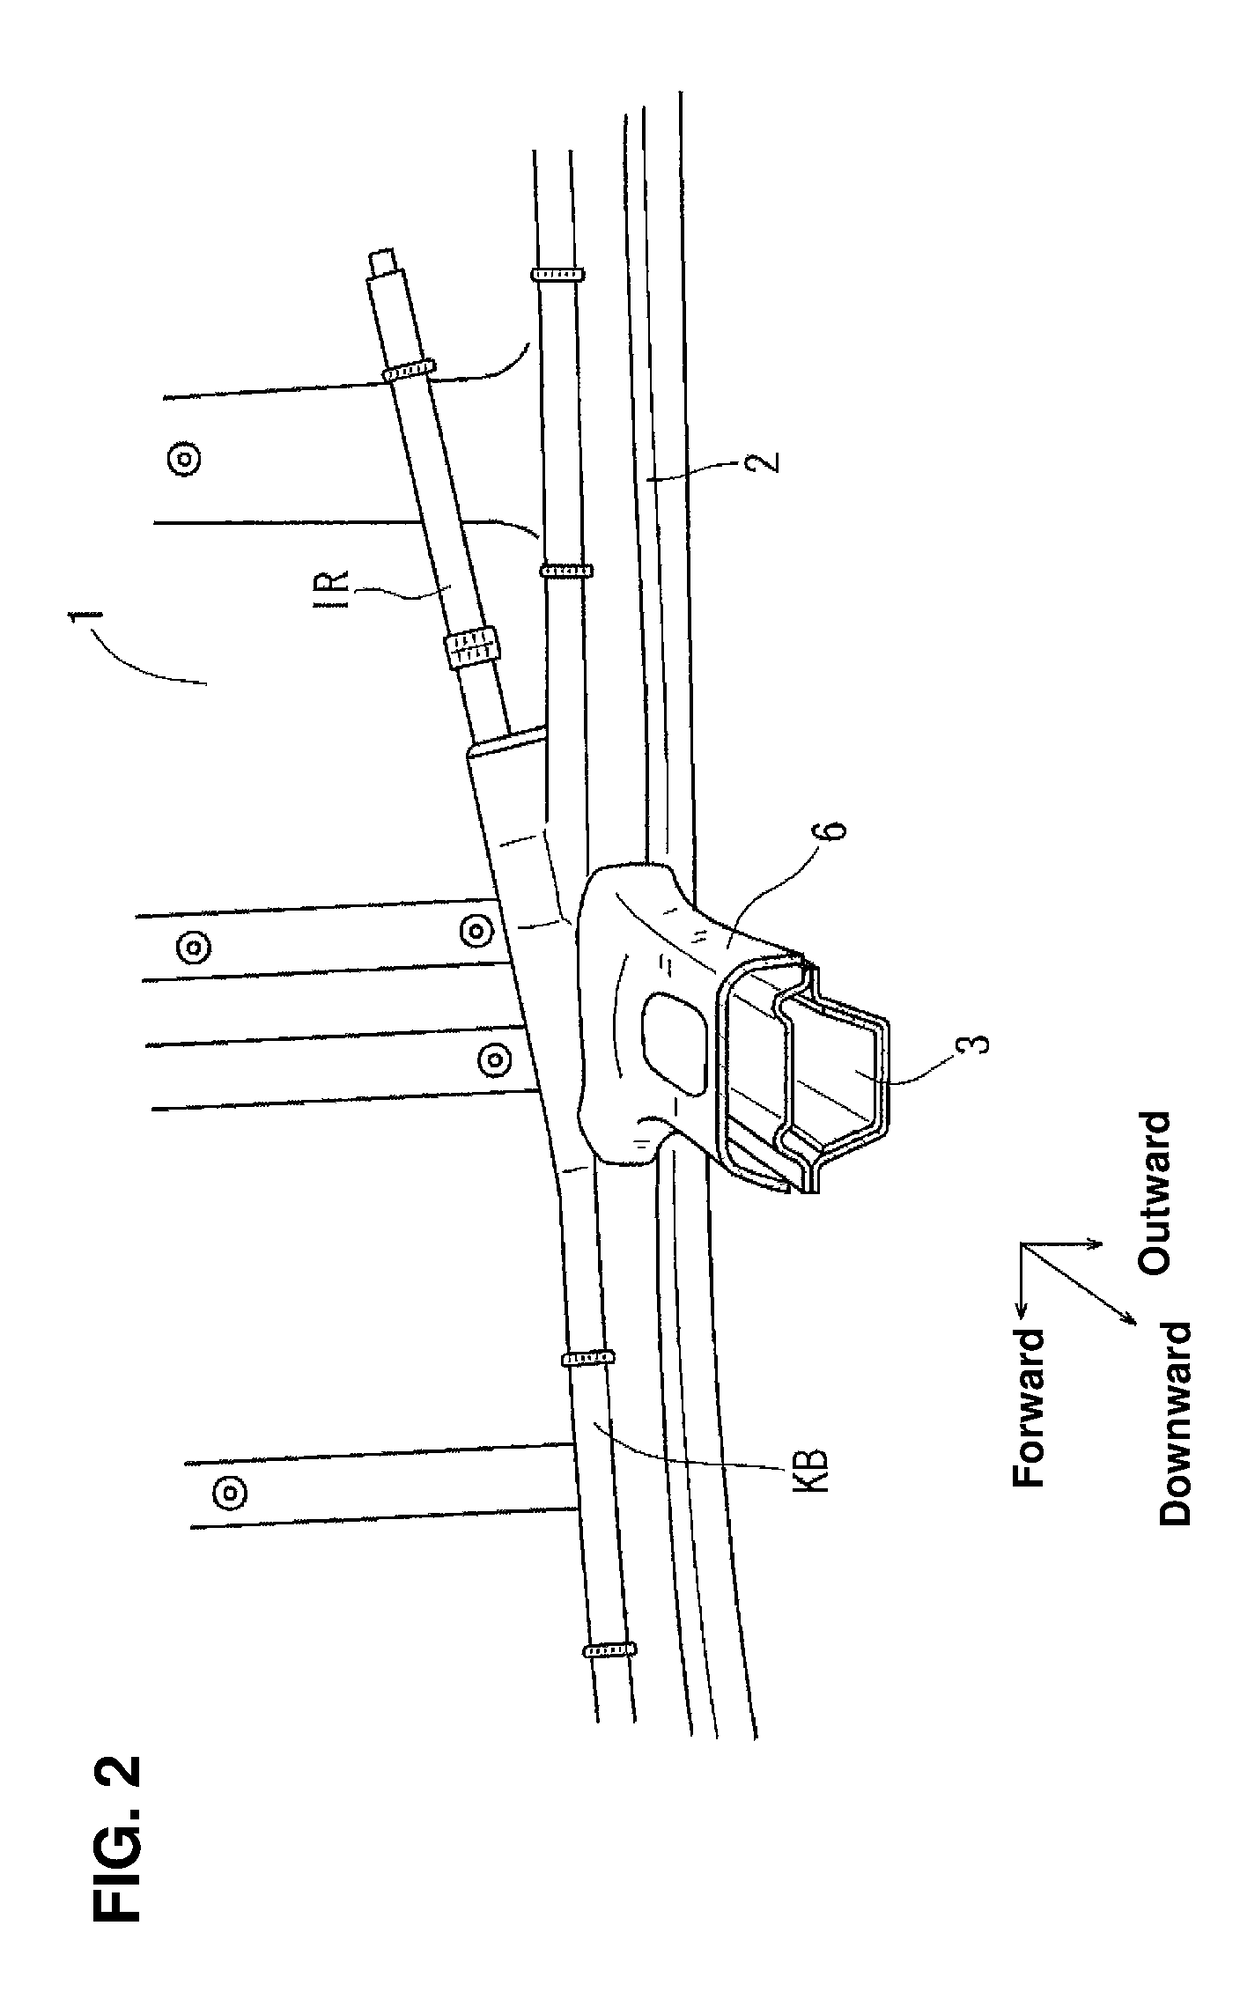 Passenger protection device of vehicle